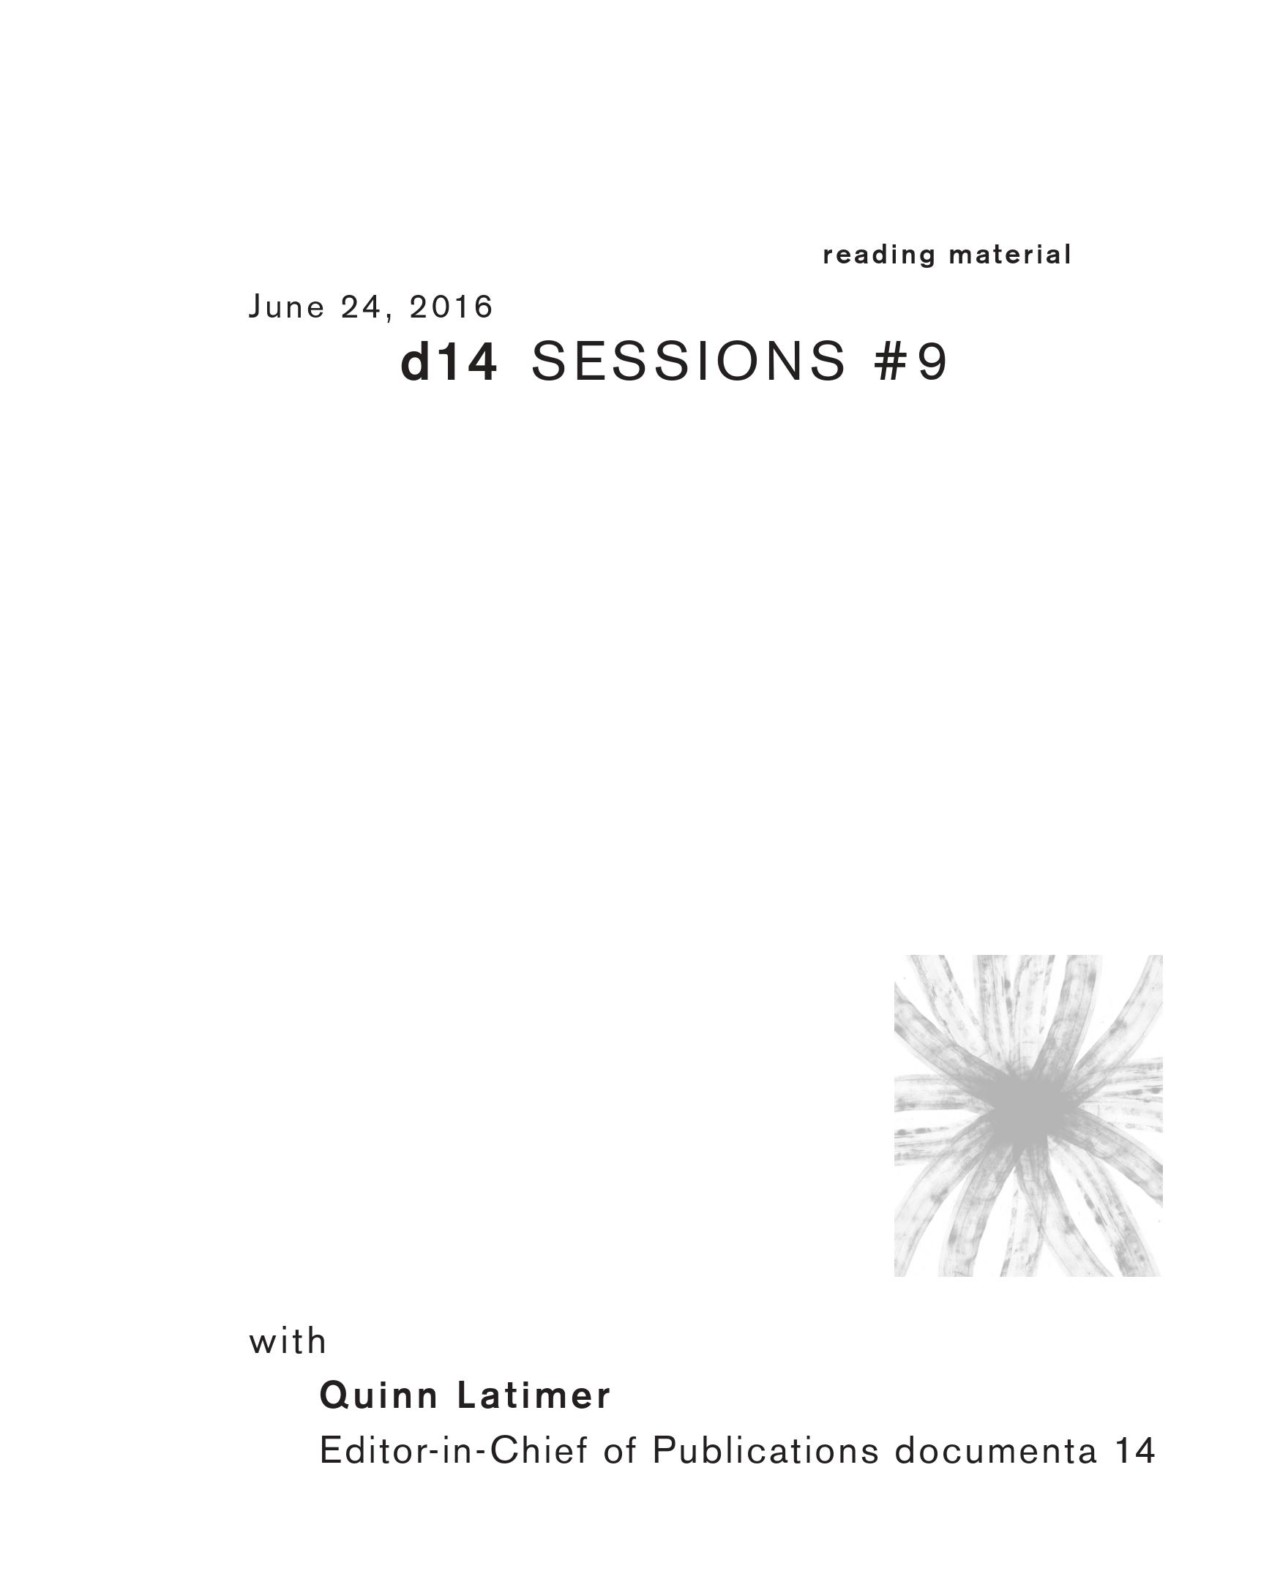 Membrane d14 SESSIONS #9, with Quinn Latimer, Editor-in-Chief of Publications d14